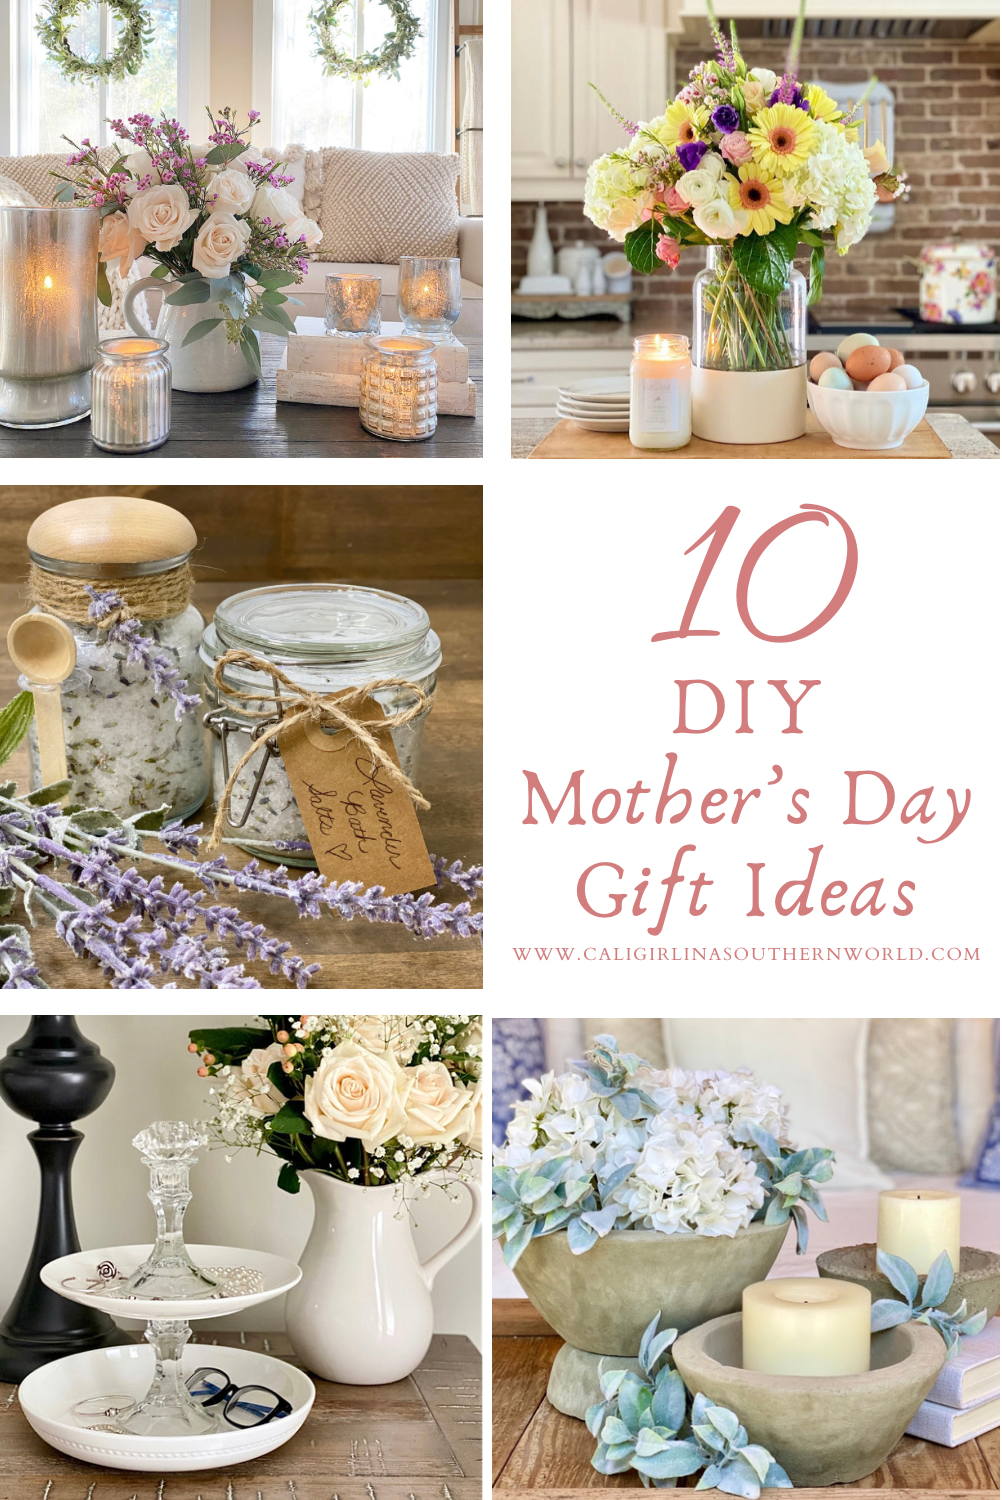 A Pinterest Pin of a collage of great DIY Mother's Day gift ideas including a color block vase, mercury glass candle holders, a tiered jewelry stand and more.